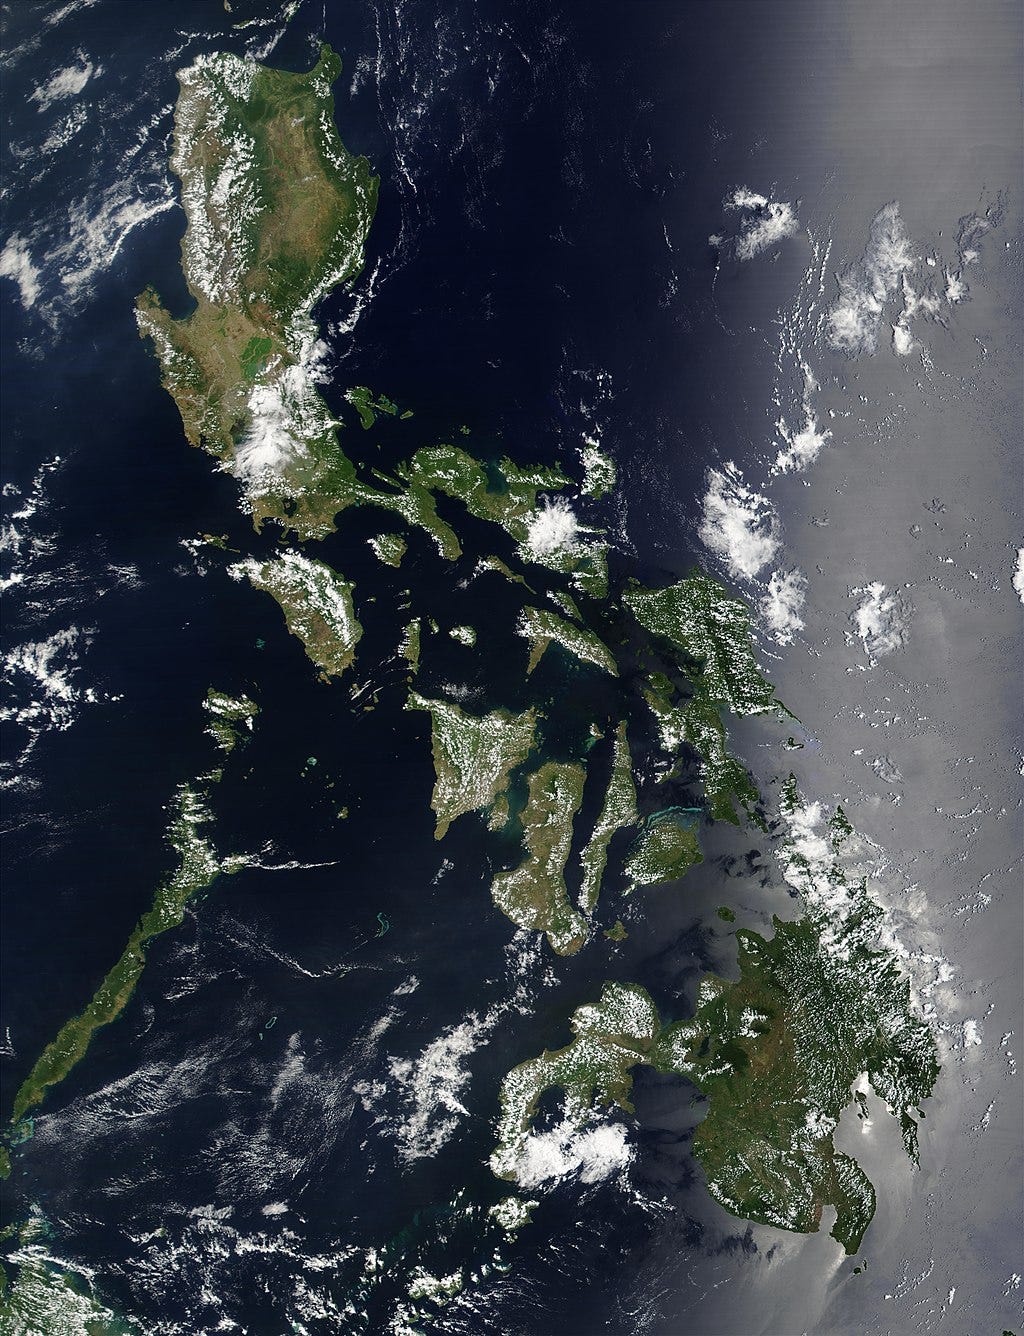 satellite image of the Philippines, there are clouds covering some of the islands which appear brown and green. the ocean is dark blue